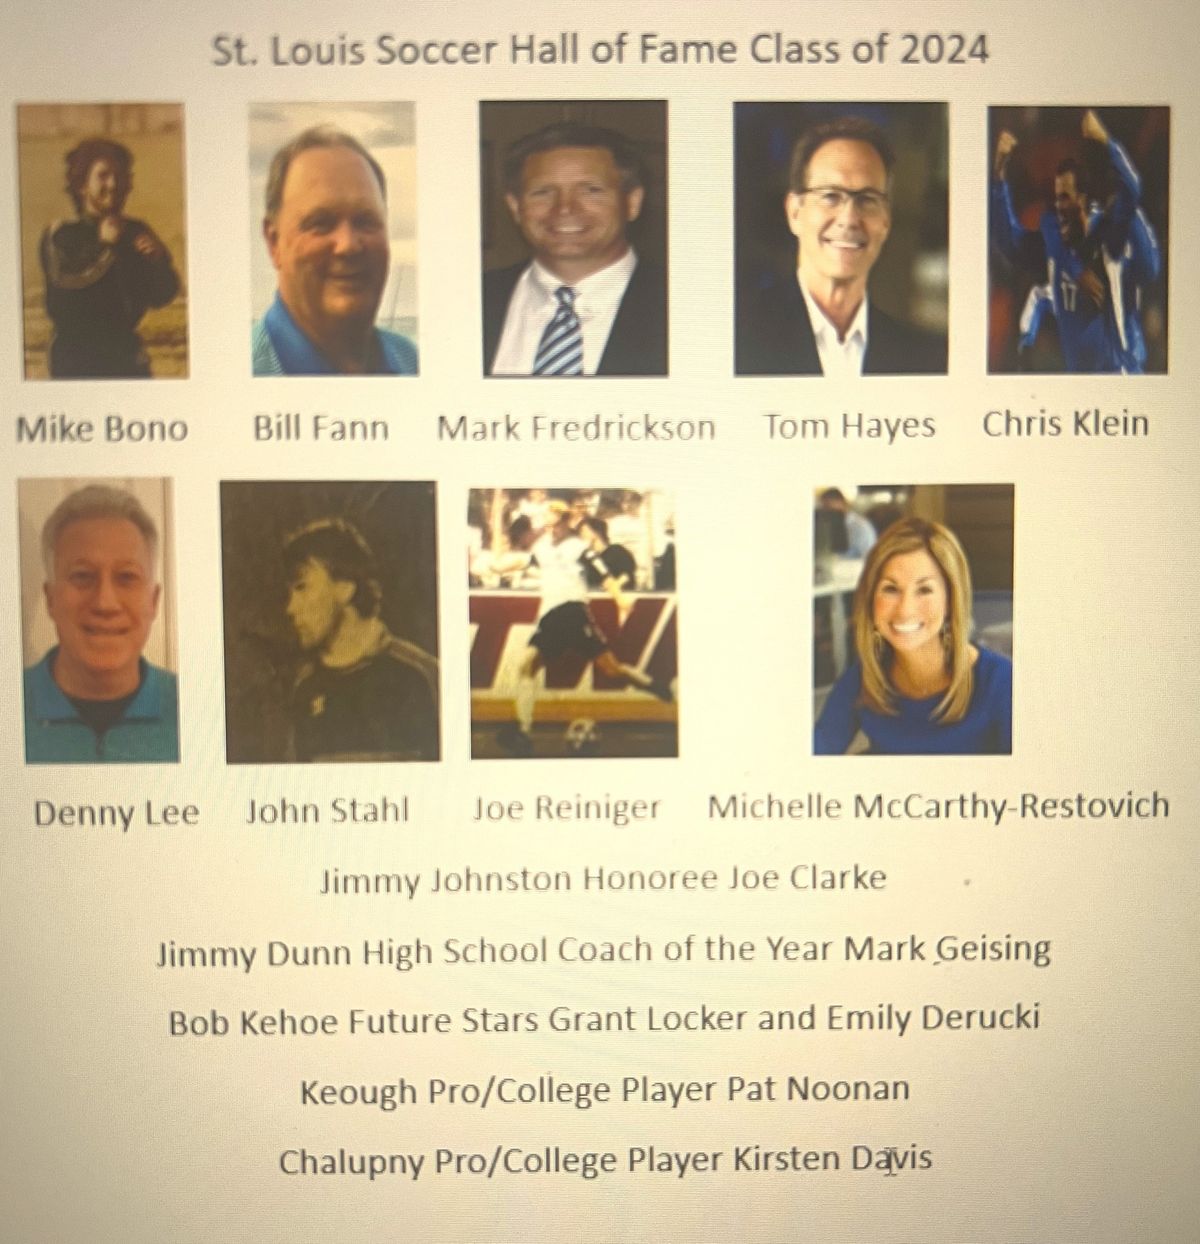 St. Louis Soccer Hall of Fame Induction Banquet